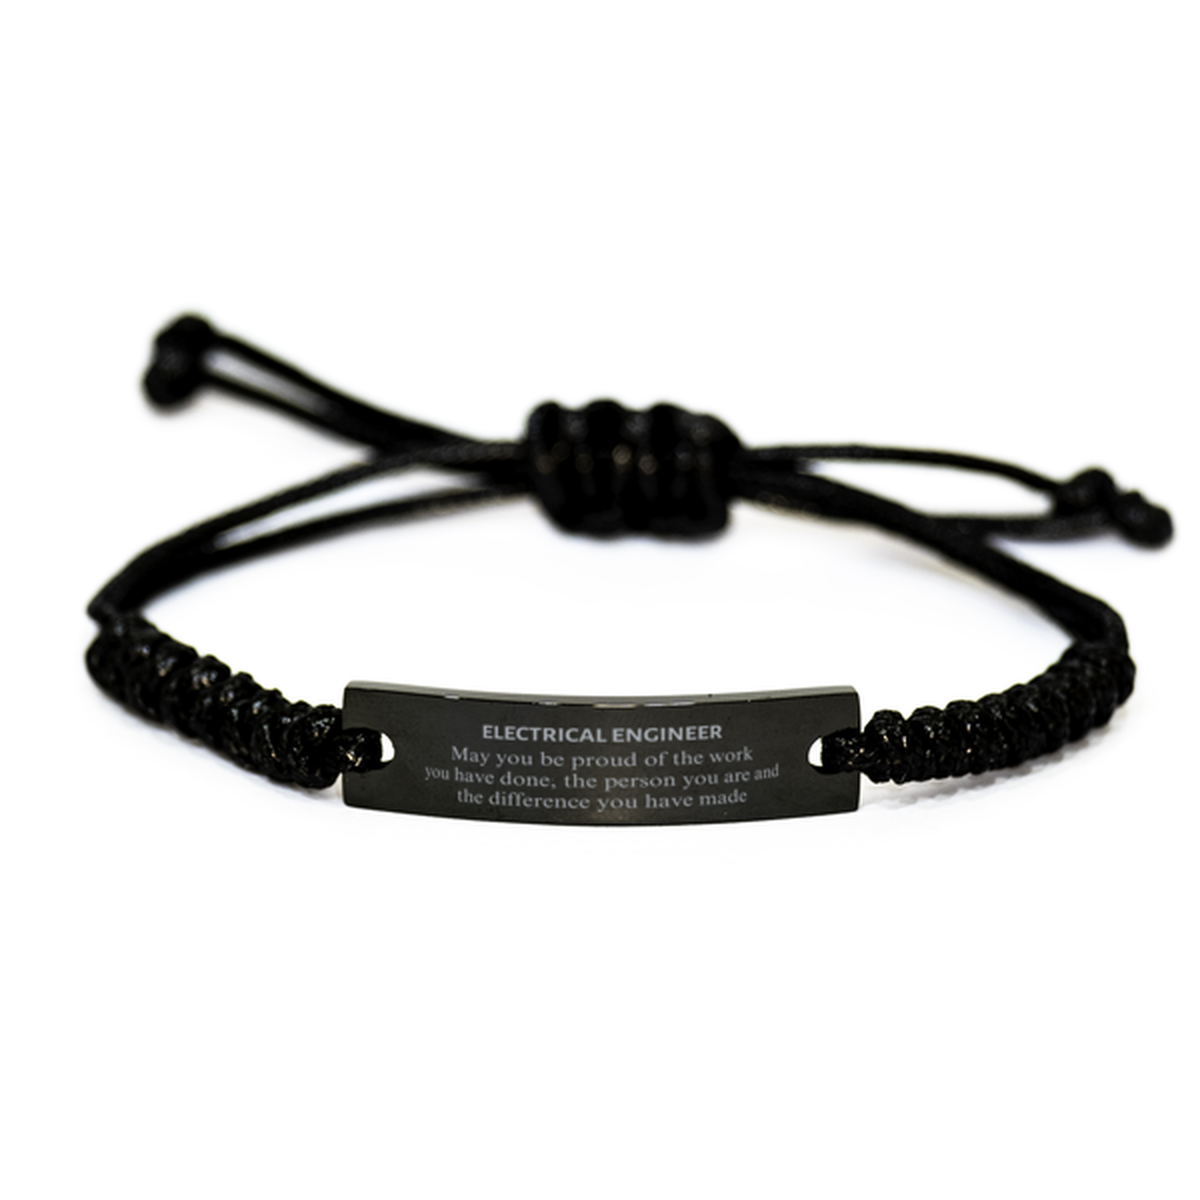 Electrical Engineer May you be proud of the work you have done, Retirement Electrical Engineer Black Rope Bracelet for Colleague Appreciation Gifts Amazing for Electrical Engineer